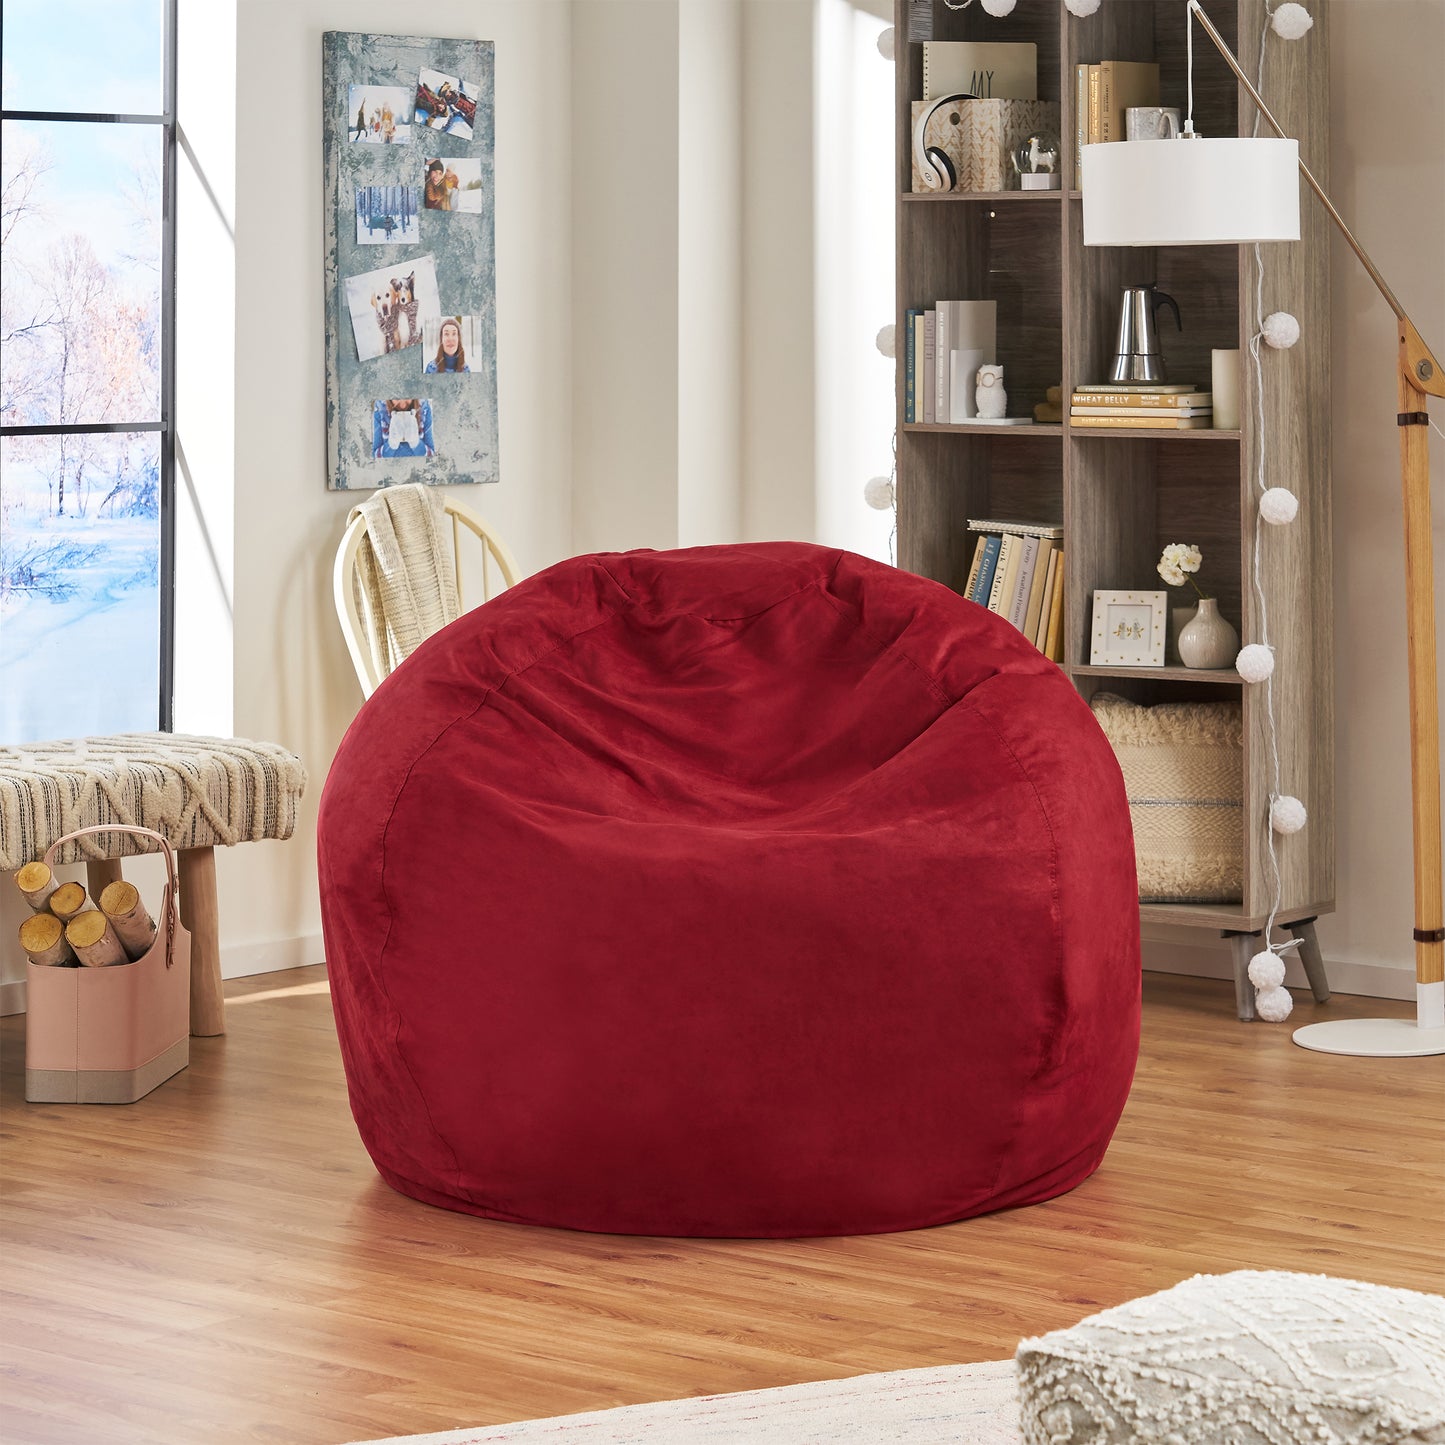 Violetta Traditional 5 Foot Suede Bean Bag (Cover Only)